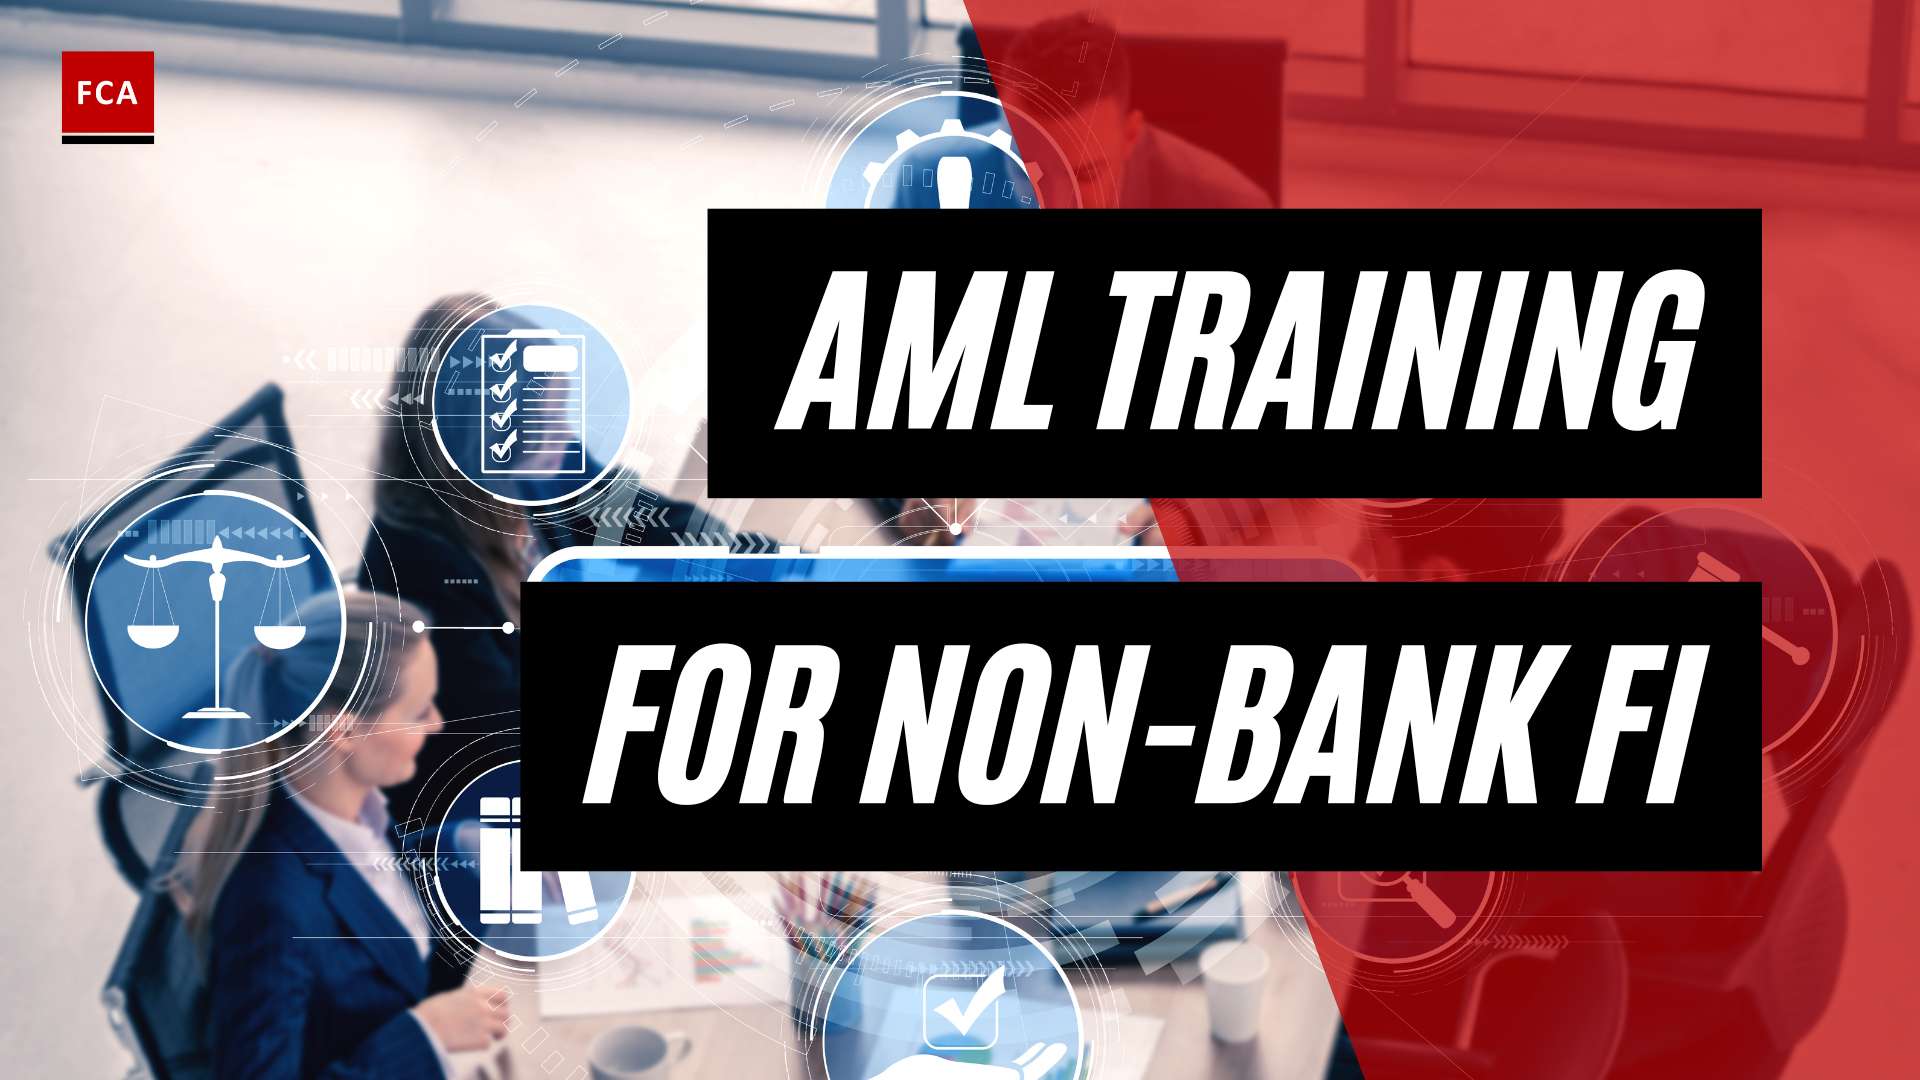 Achieving Transparency: Aml Monitoring For Non-Bank Financial Institutions